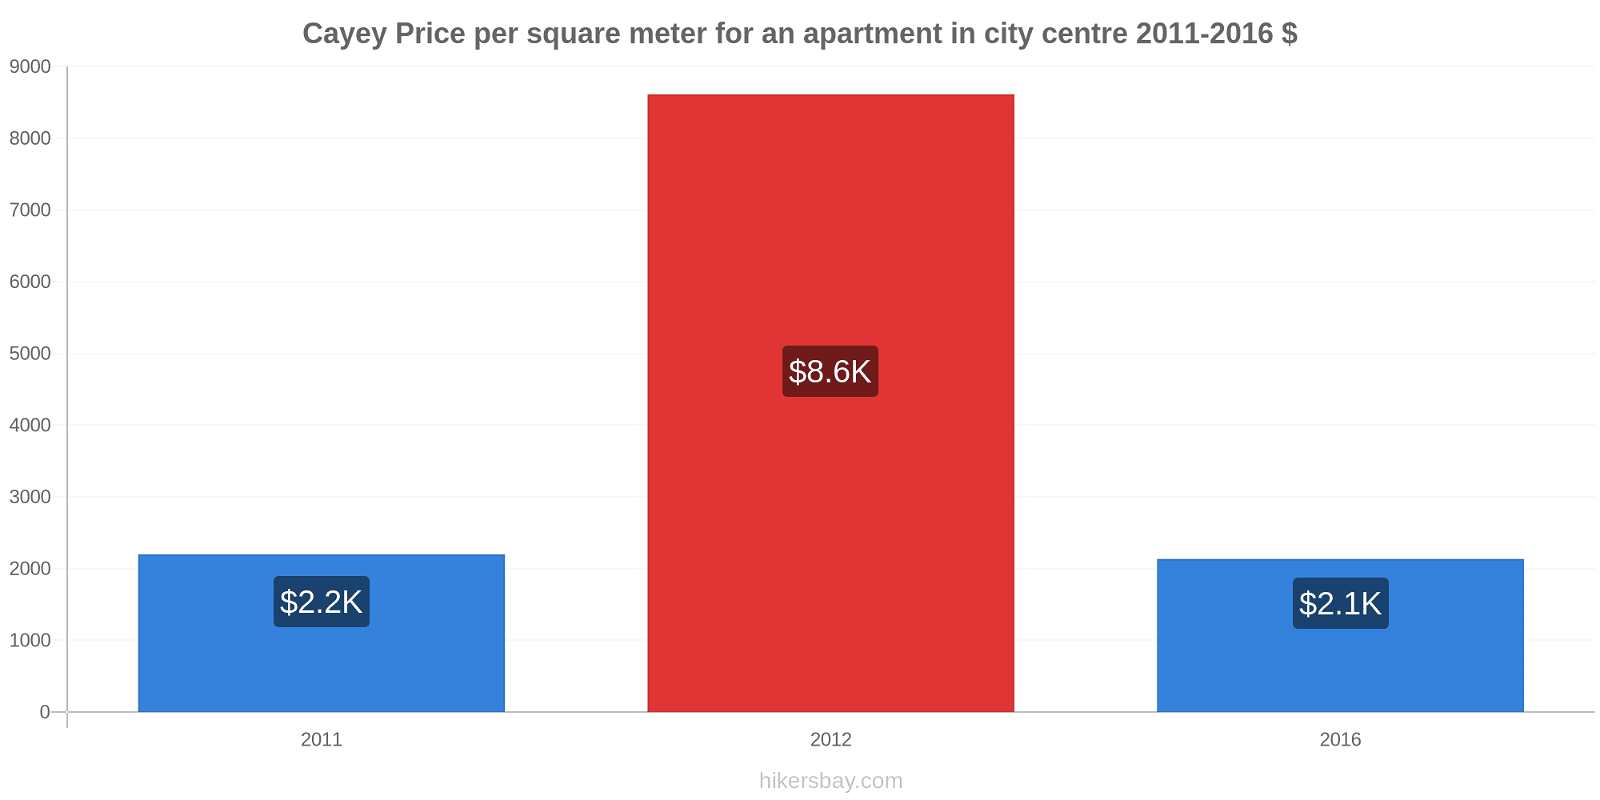 Cayey price changes Price per square meter for an apartment in city centre hikersbay.com